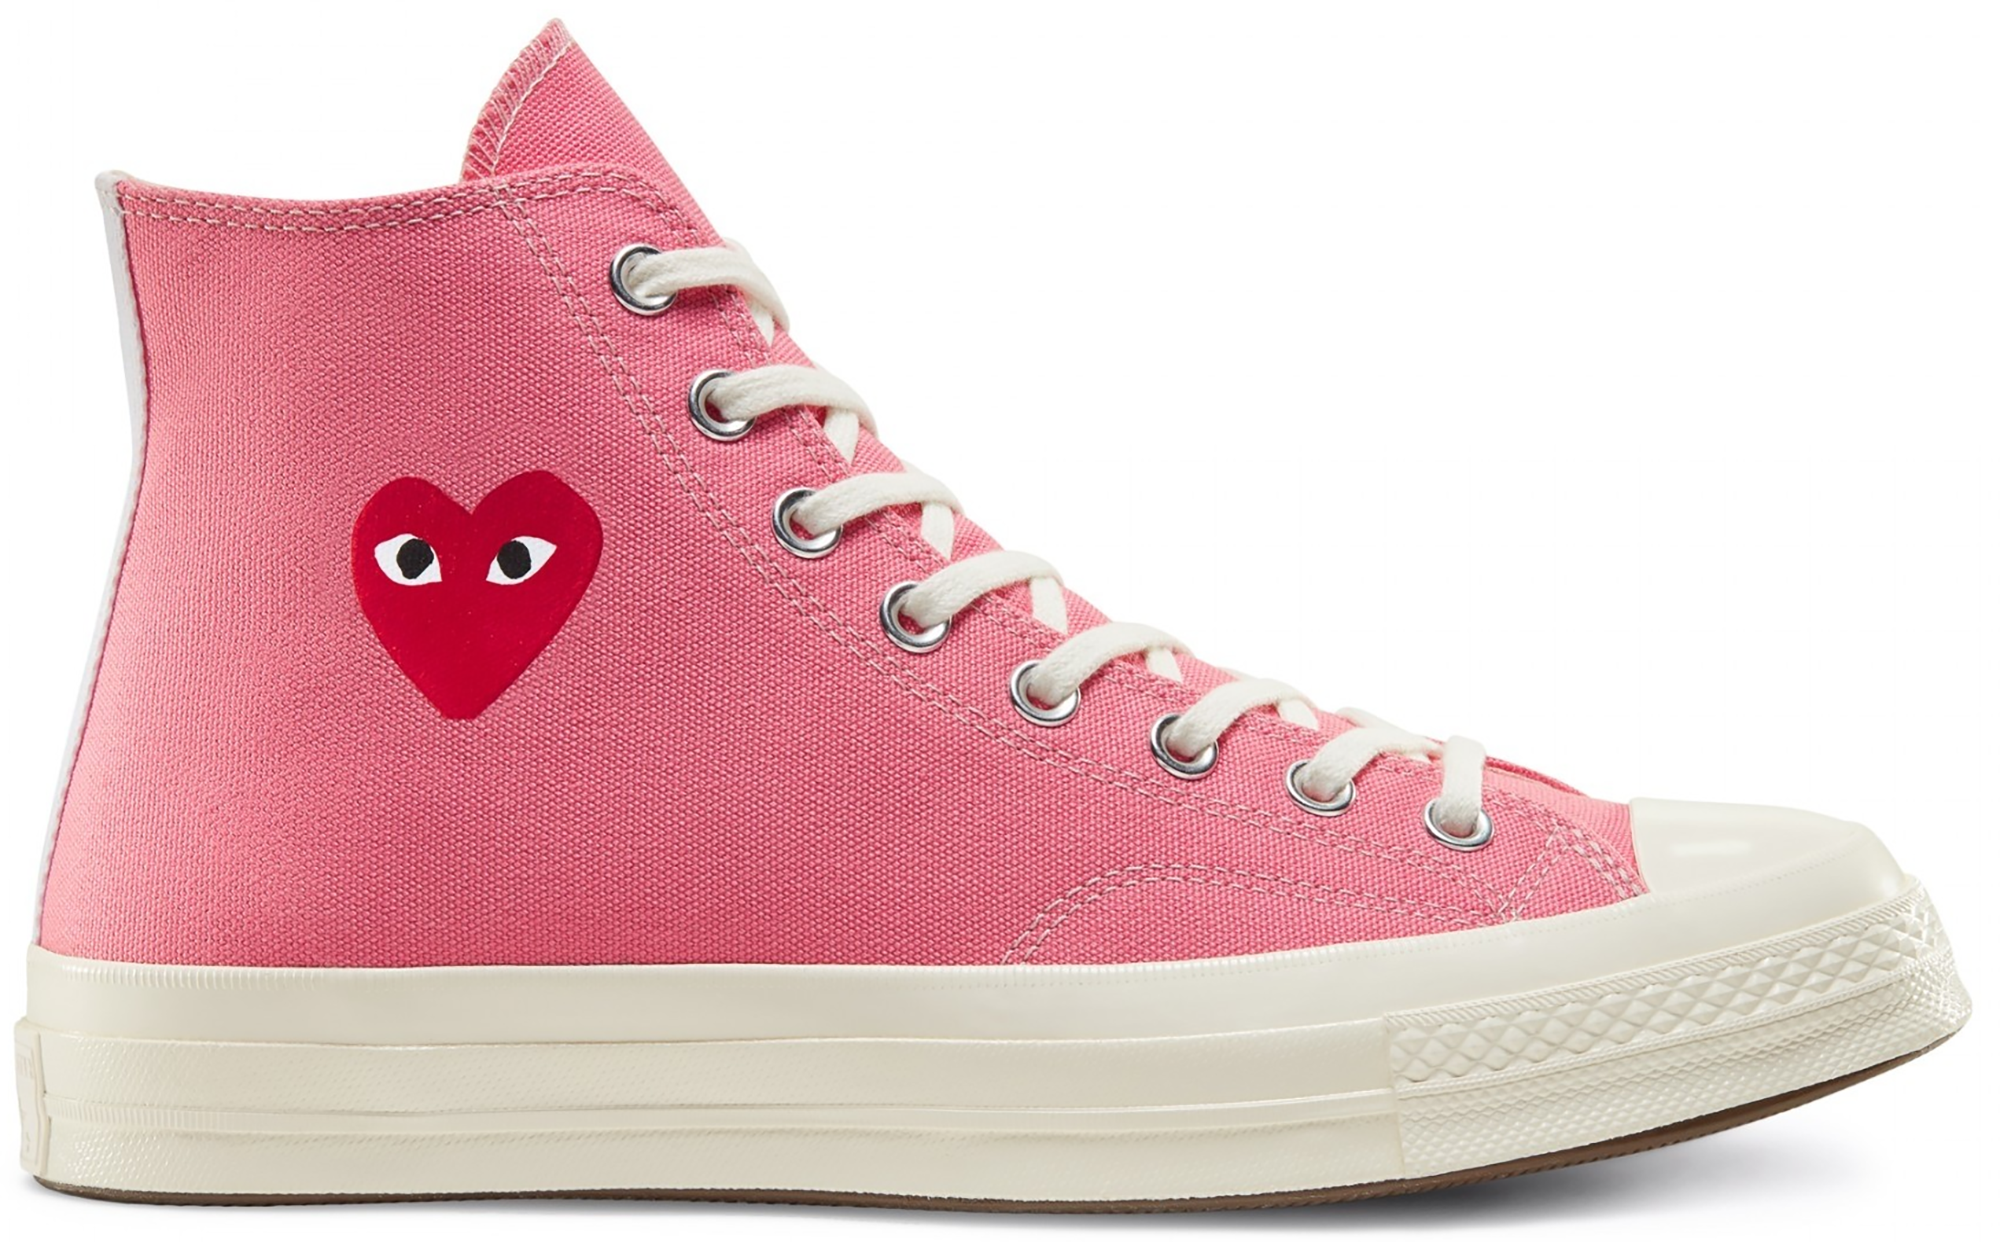 bright pink converse all star